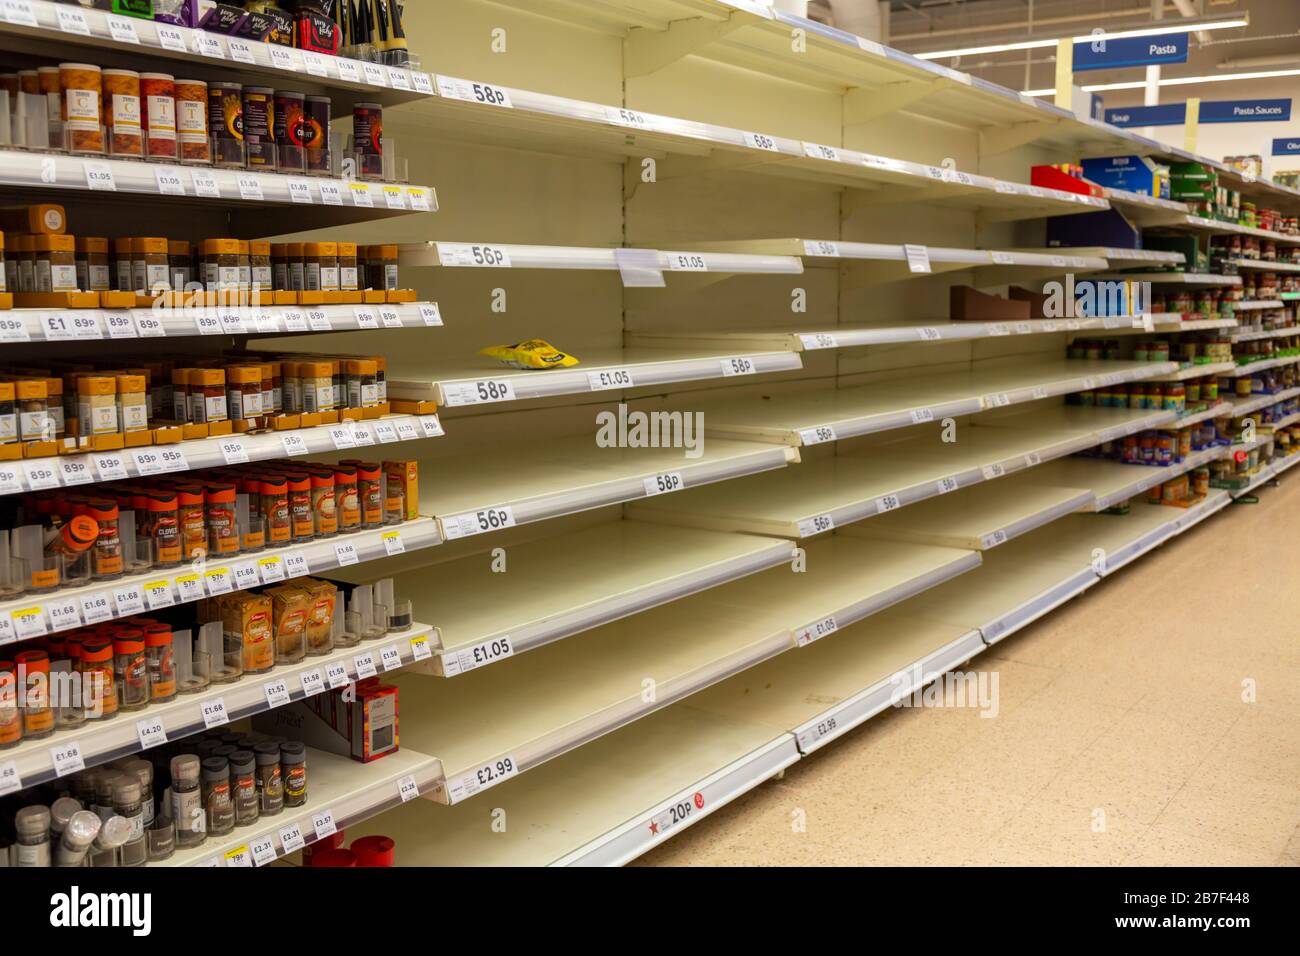 11 March 2020: Supermarket shortages - Pasta. Coronavirus fears have triggered panic buying leaving empty shelves in supermarkets across the United Kingdom/British Isles as people prepare for self-isolation and social distancing. Stock Photo